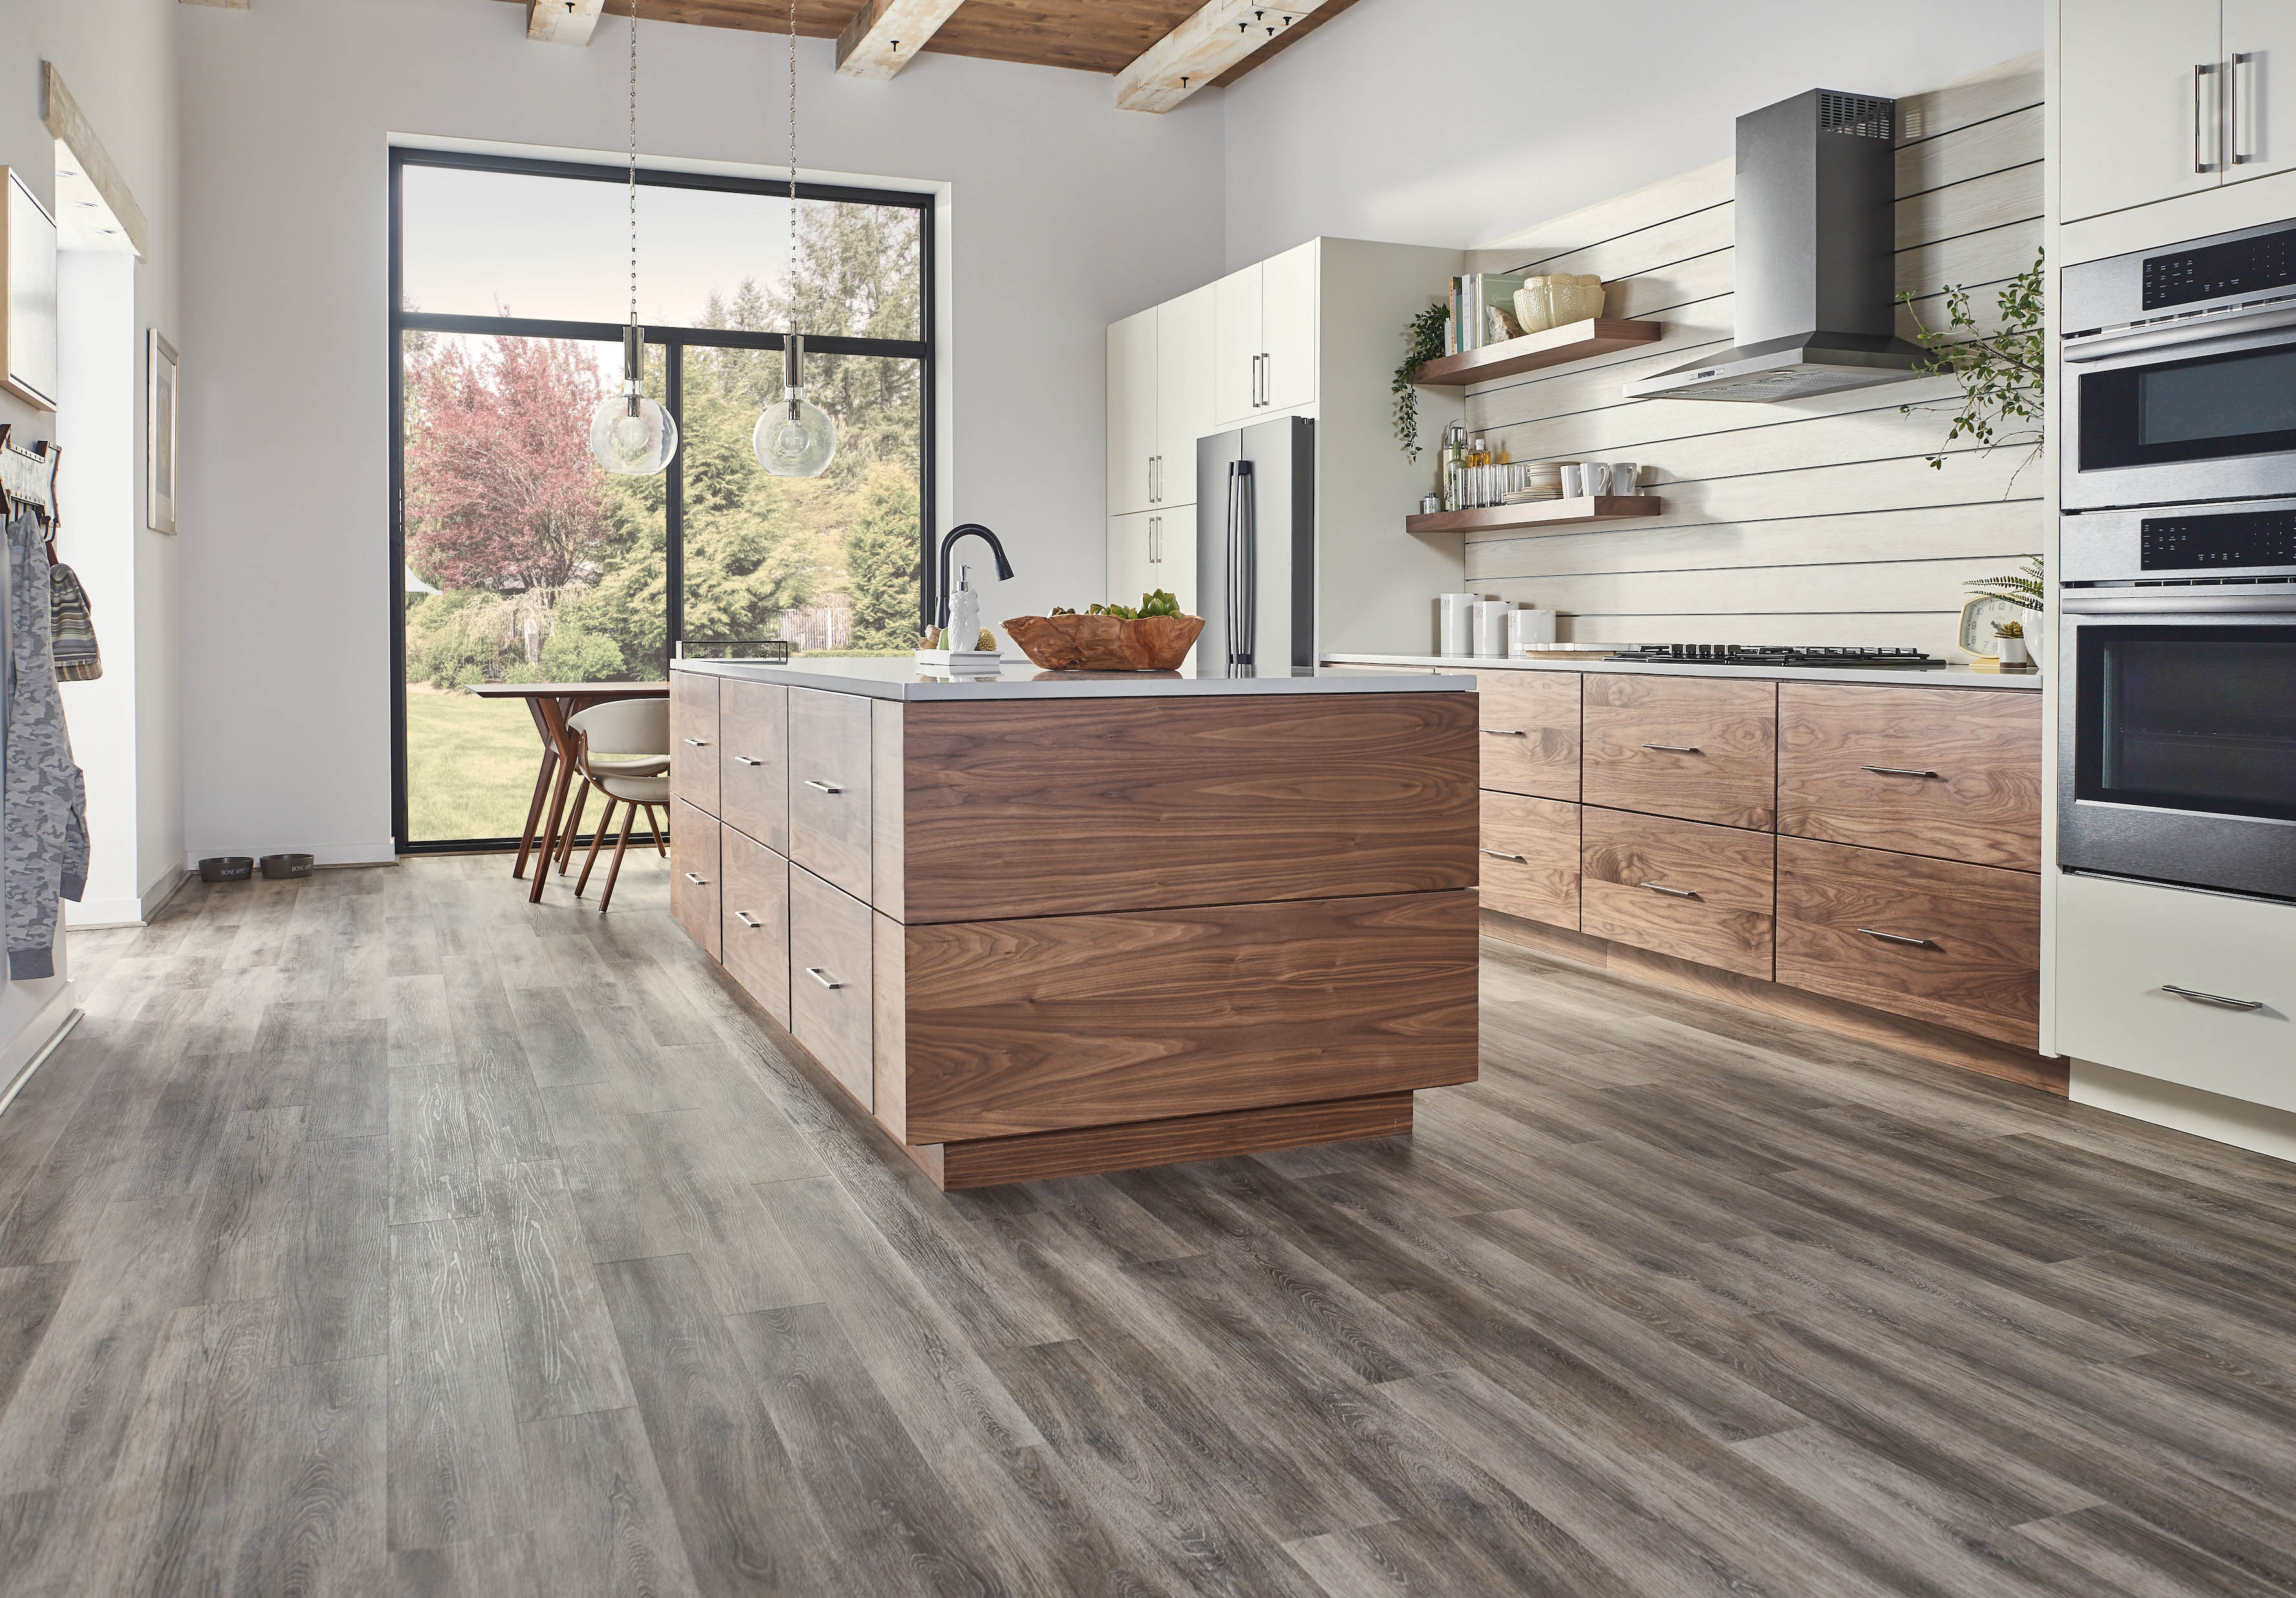 What Is Linoleum Flooring And How Is It Different From Wood?